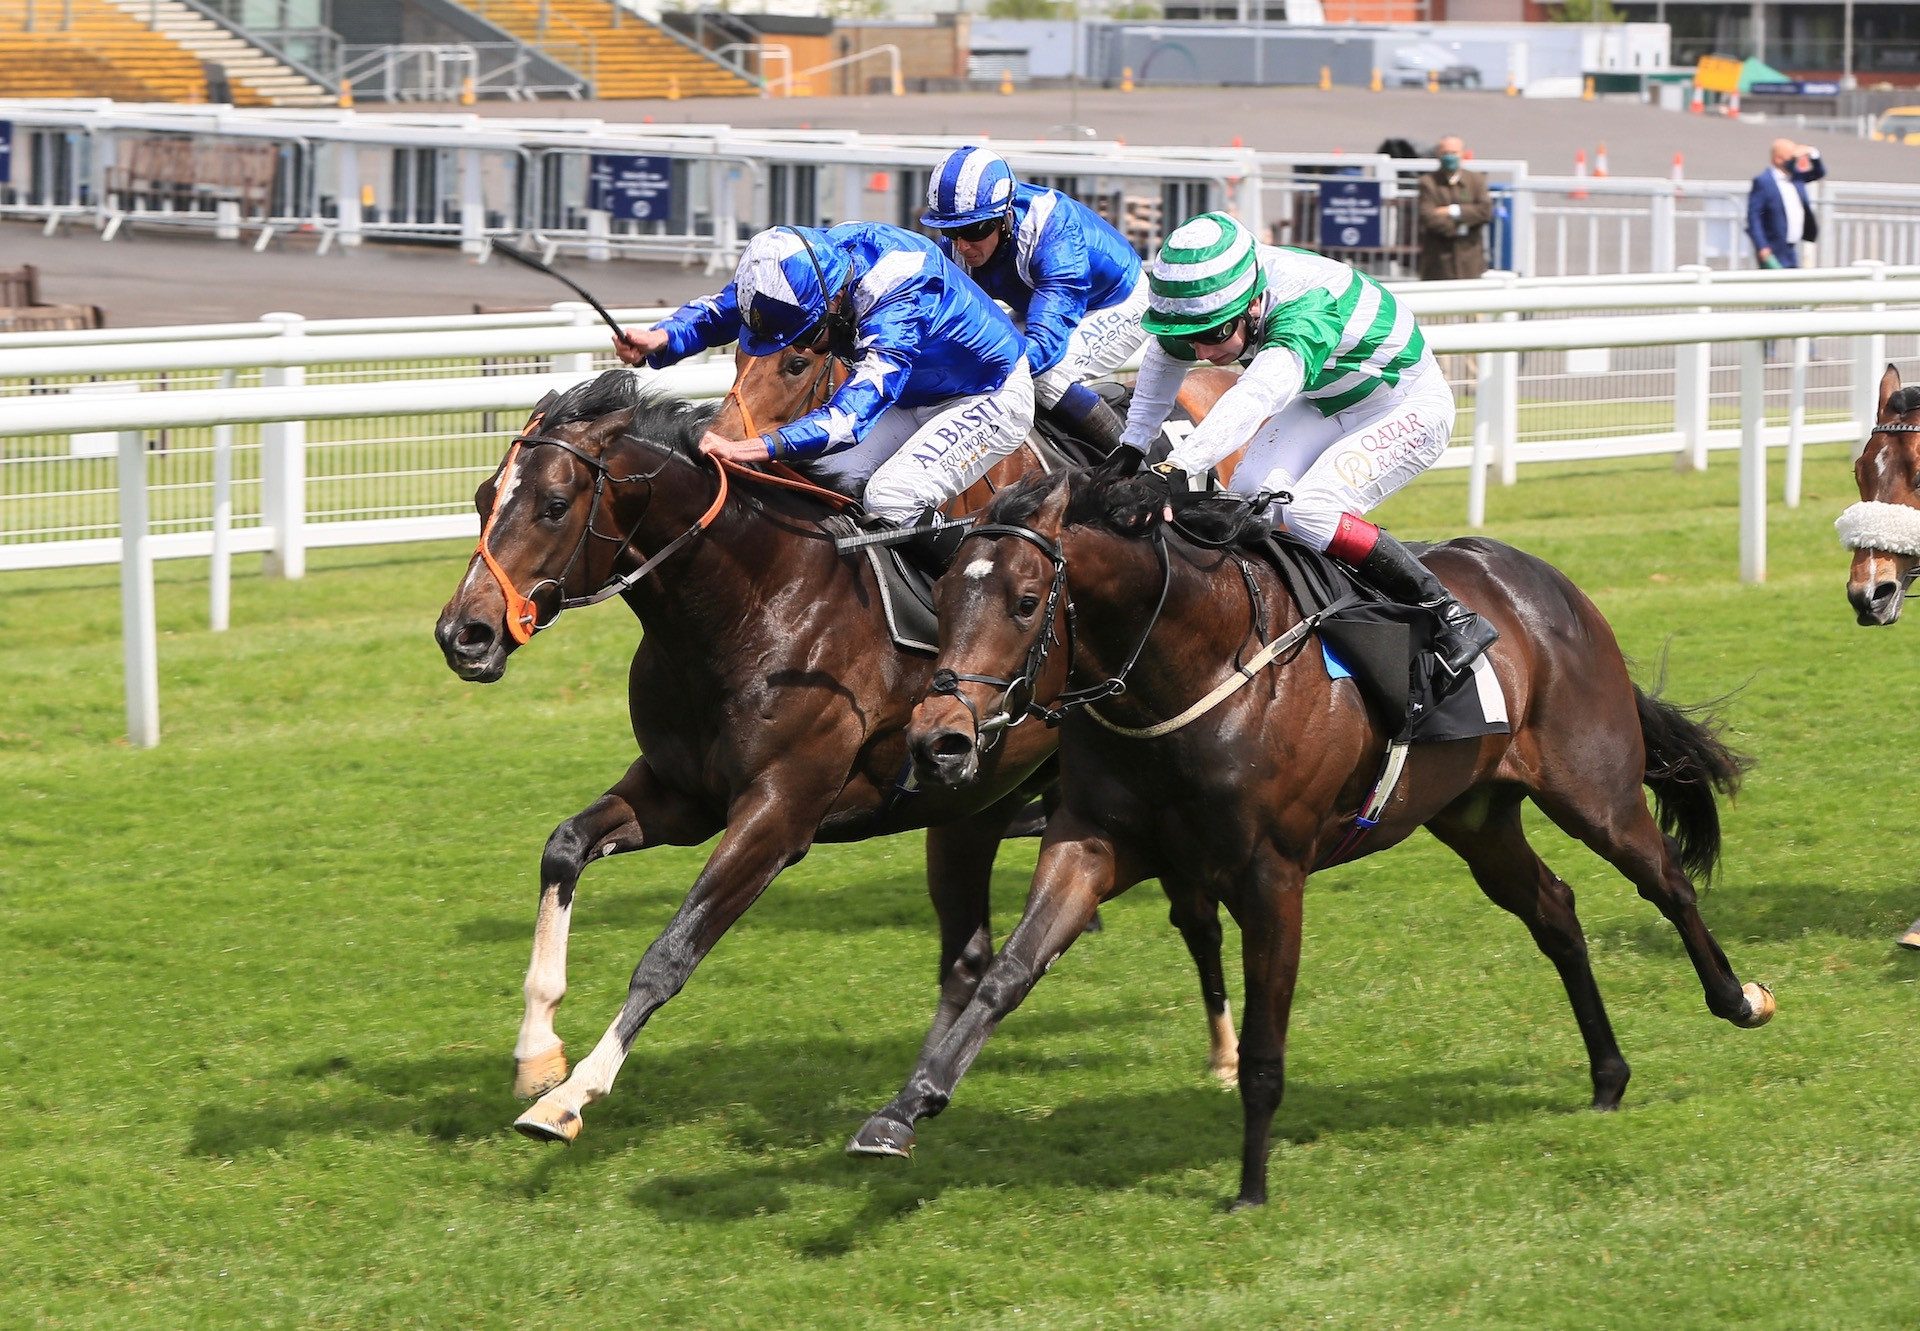 Dukebox (Holy Roman Emperor) Wins The Class 2 Conditions Stakes At Newbury